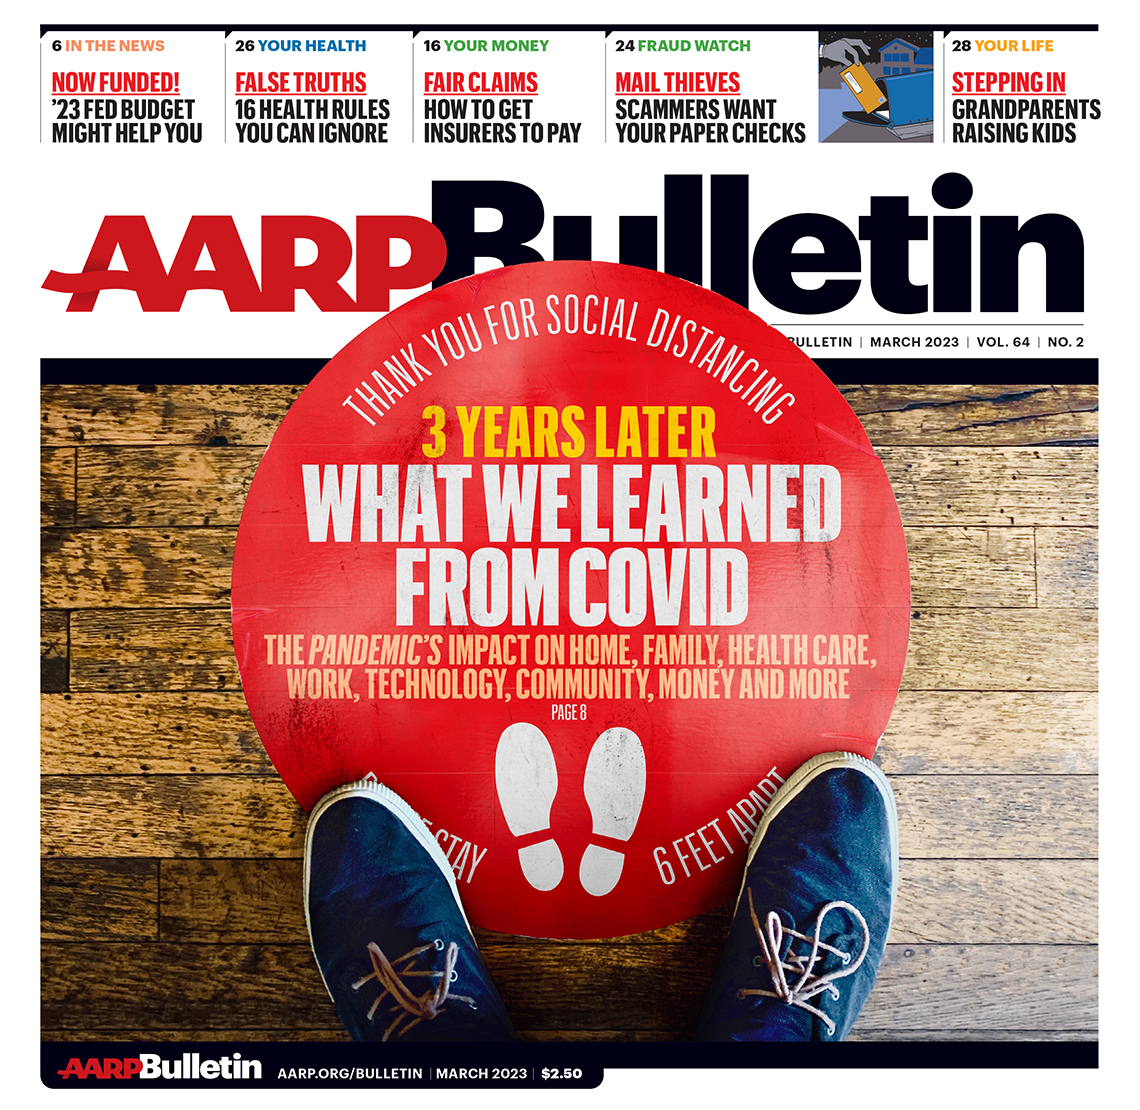 a a r p march 2023 bulletin cover; what we learned from covid